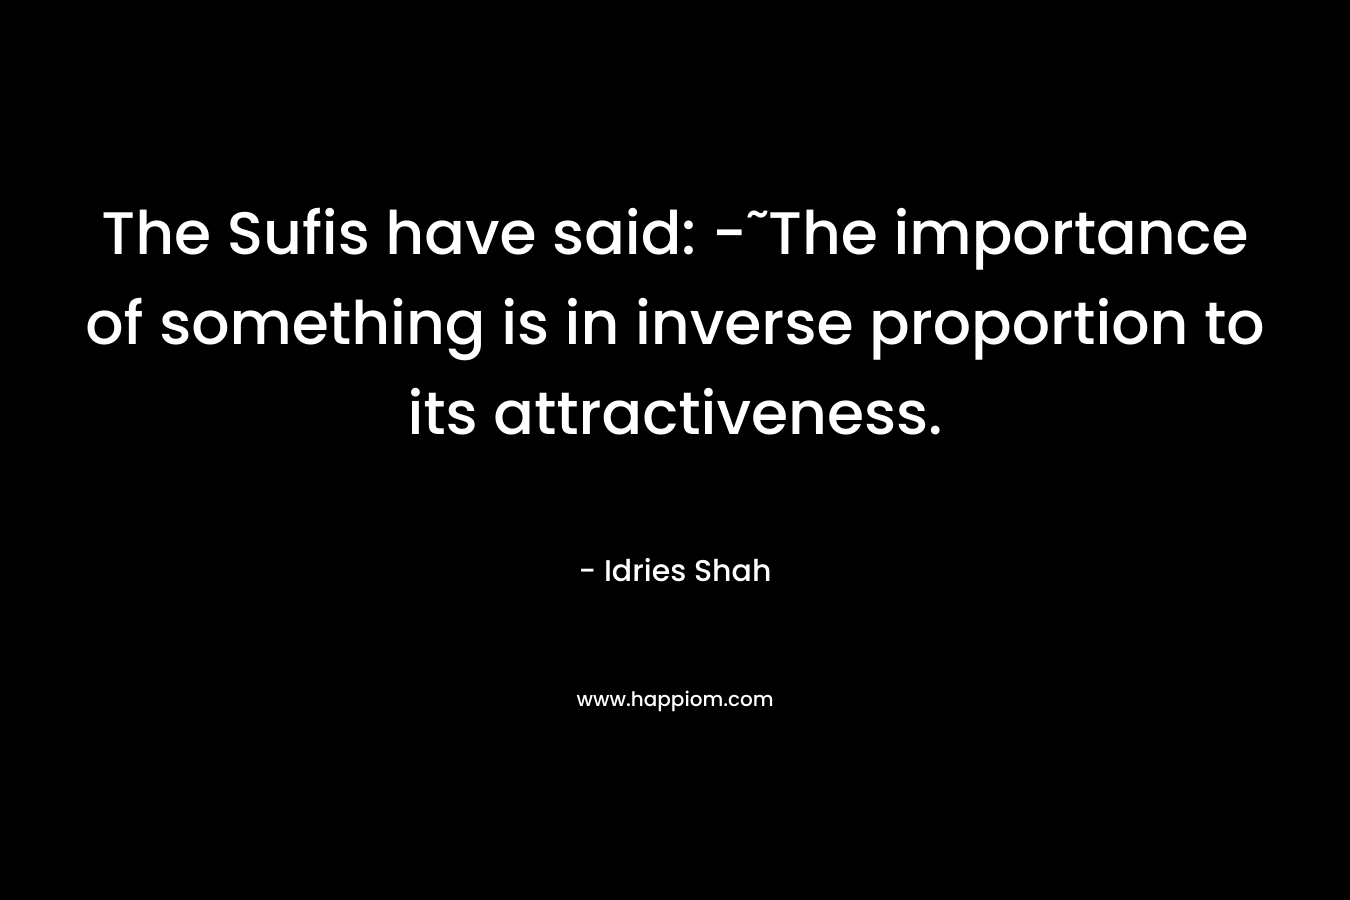 The Sufis have said: -˜The importance of something is in inverse proportion to its attractiveness.